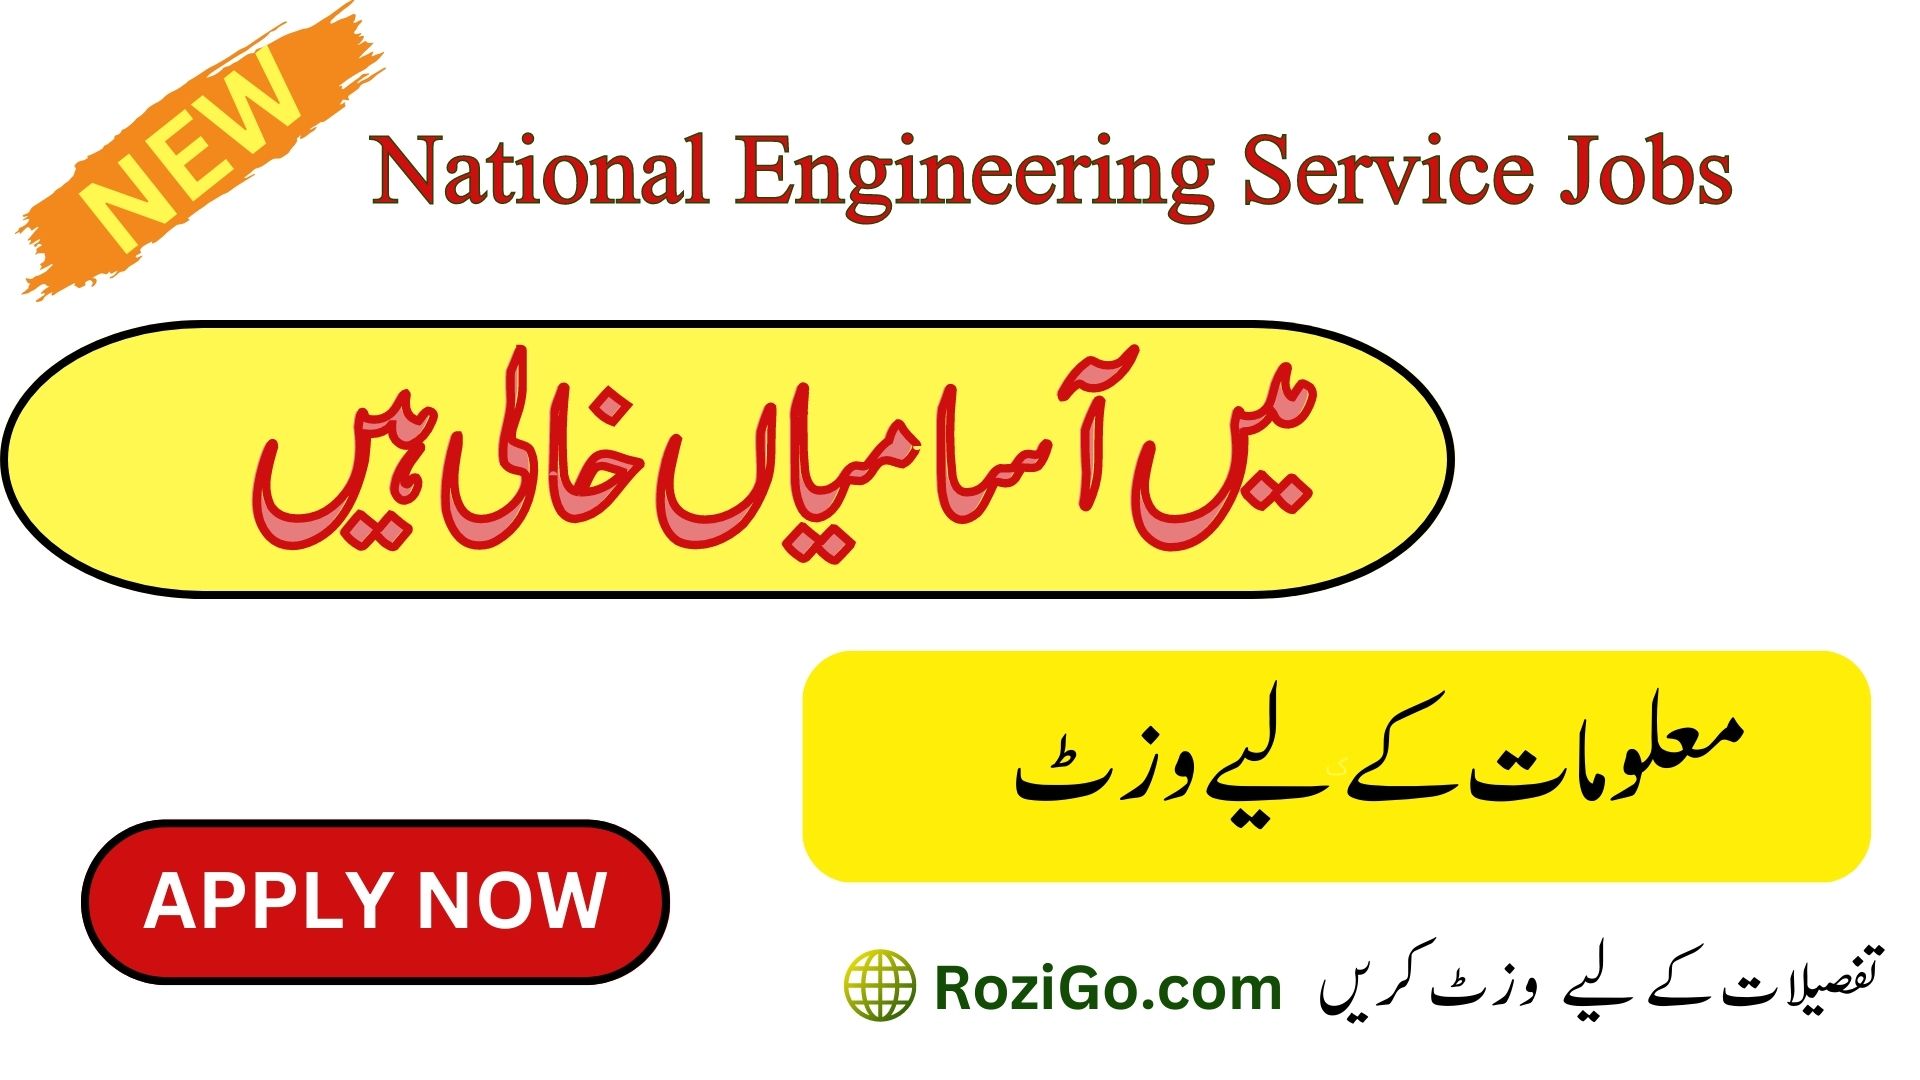 Jobs in National Engineering Service